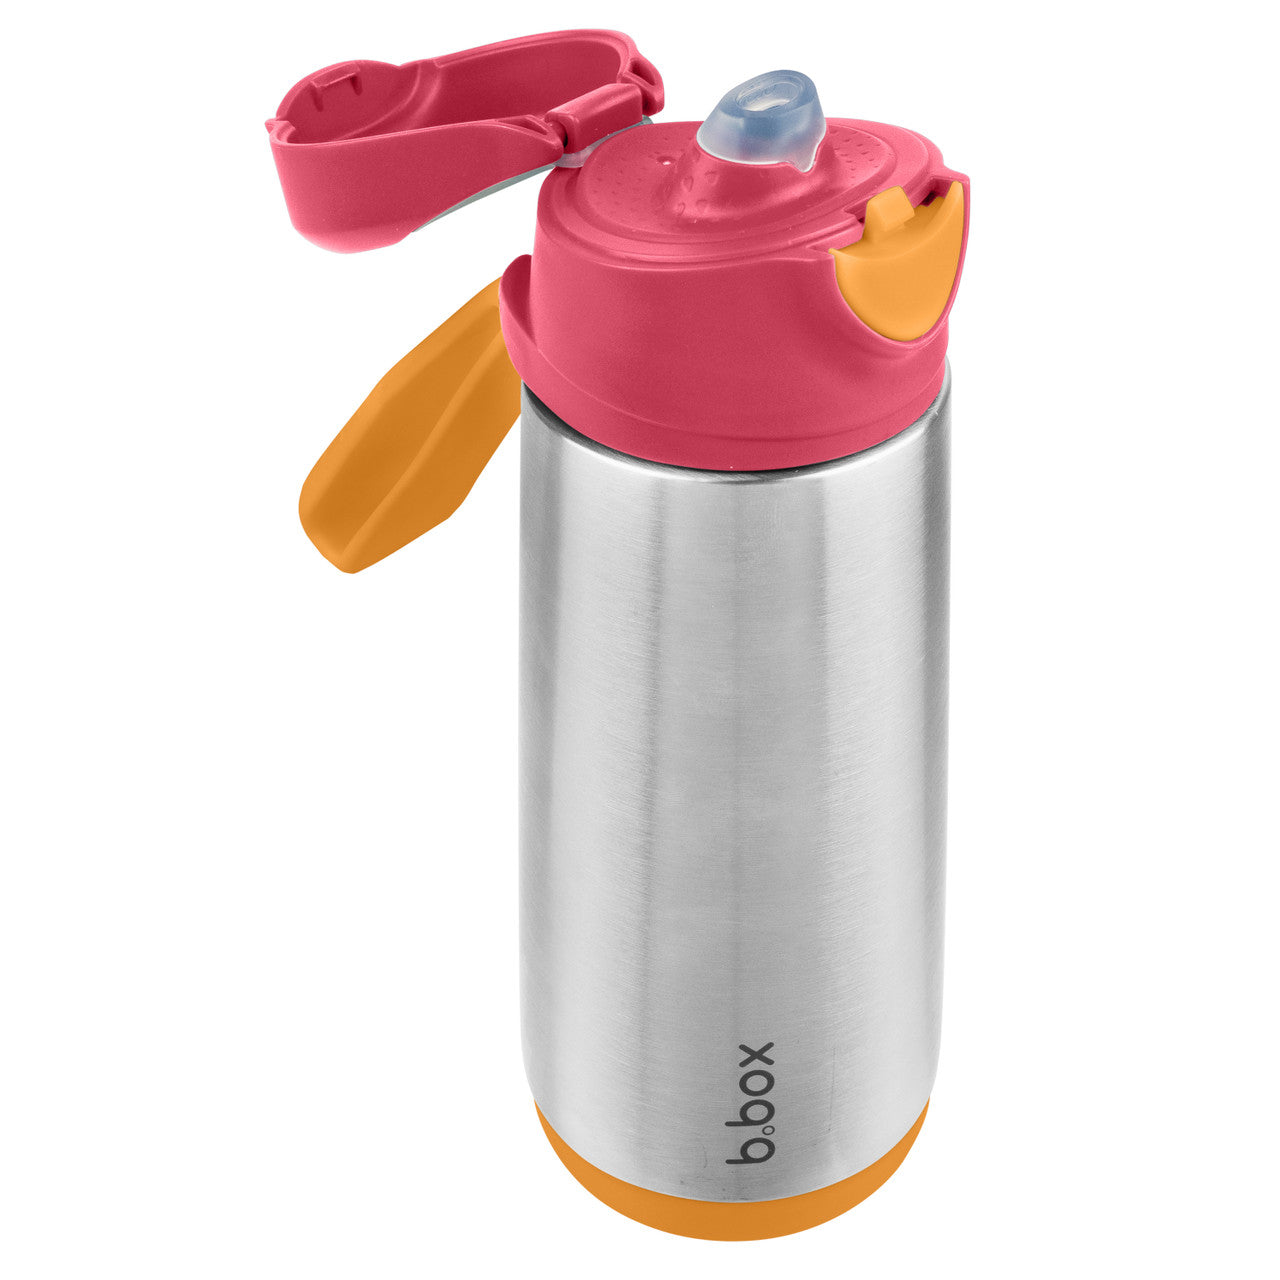 Strawberry Shake Insulated Sport Spout Drink Bottle by b.box